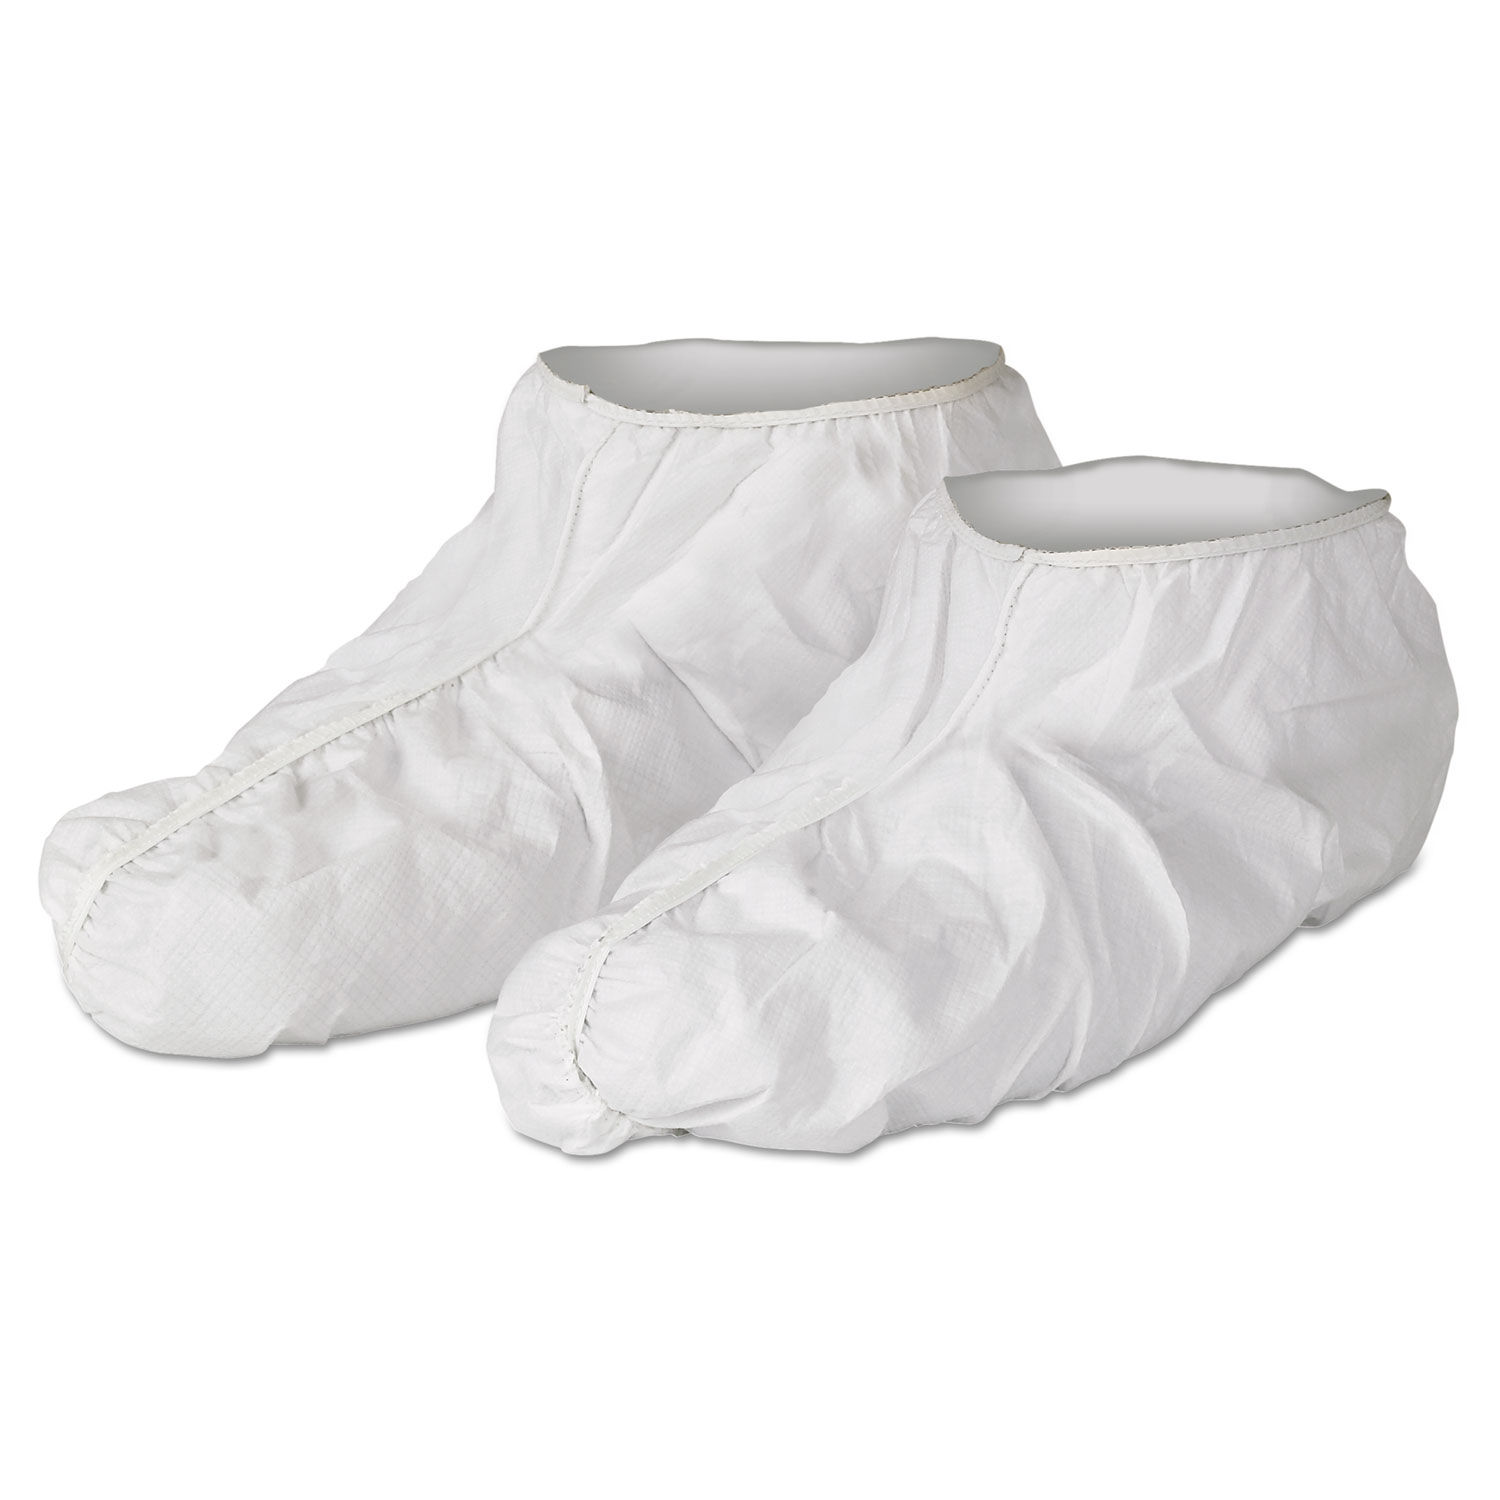 A40 LIQUID/PARTICLE PROTECTION SHOE COVERS WHITE, ONE SIZE FITS ALL, 300/CT